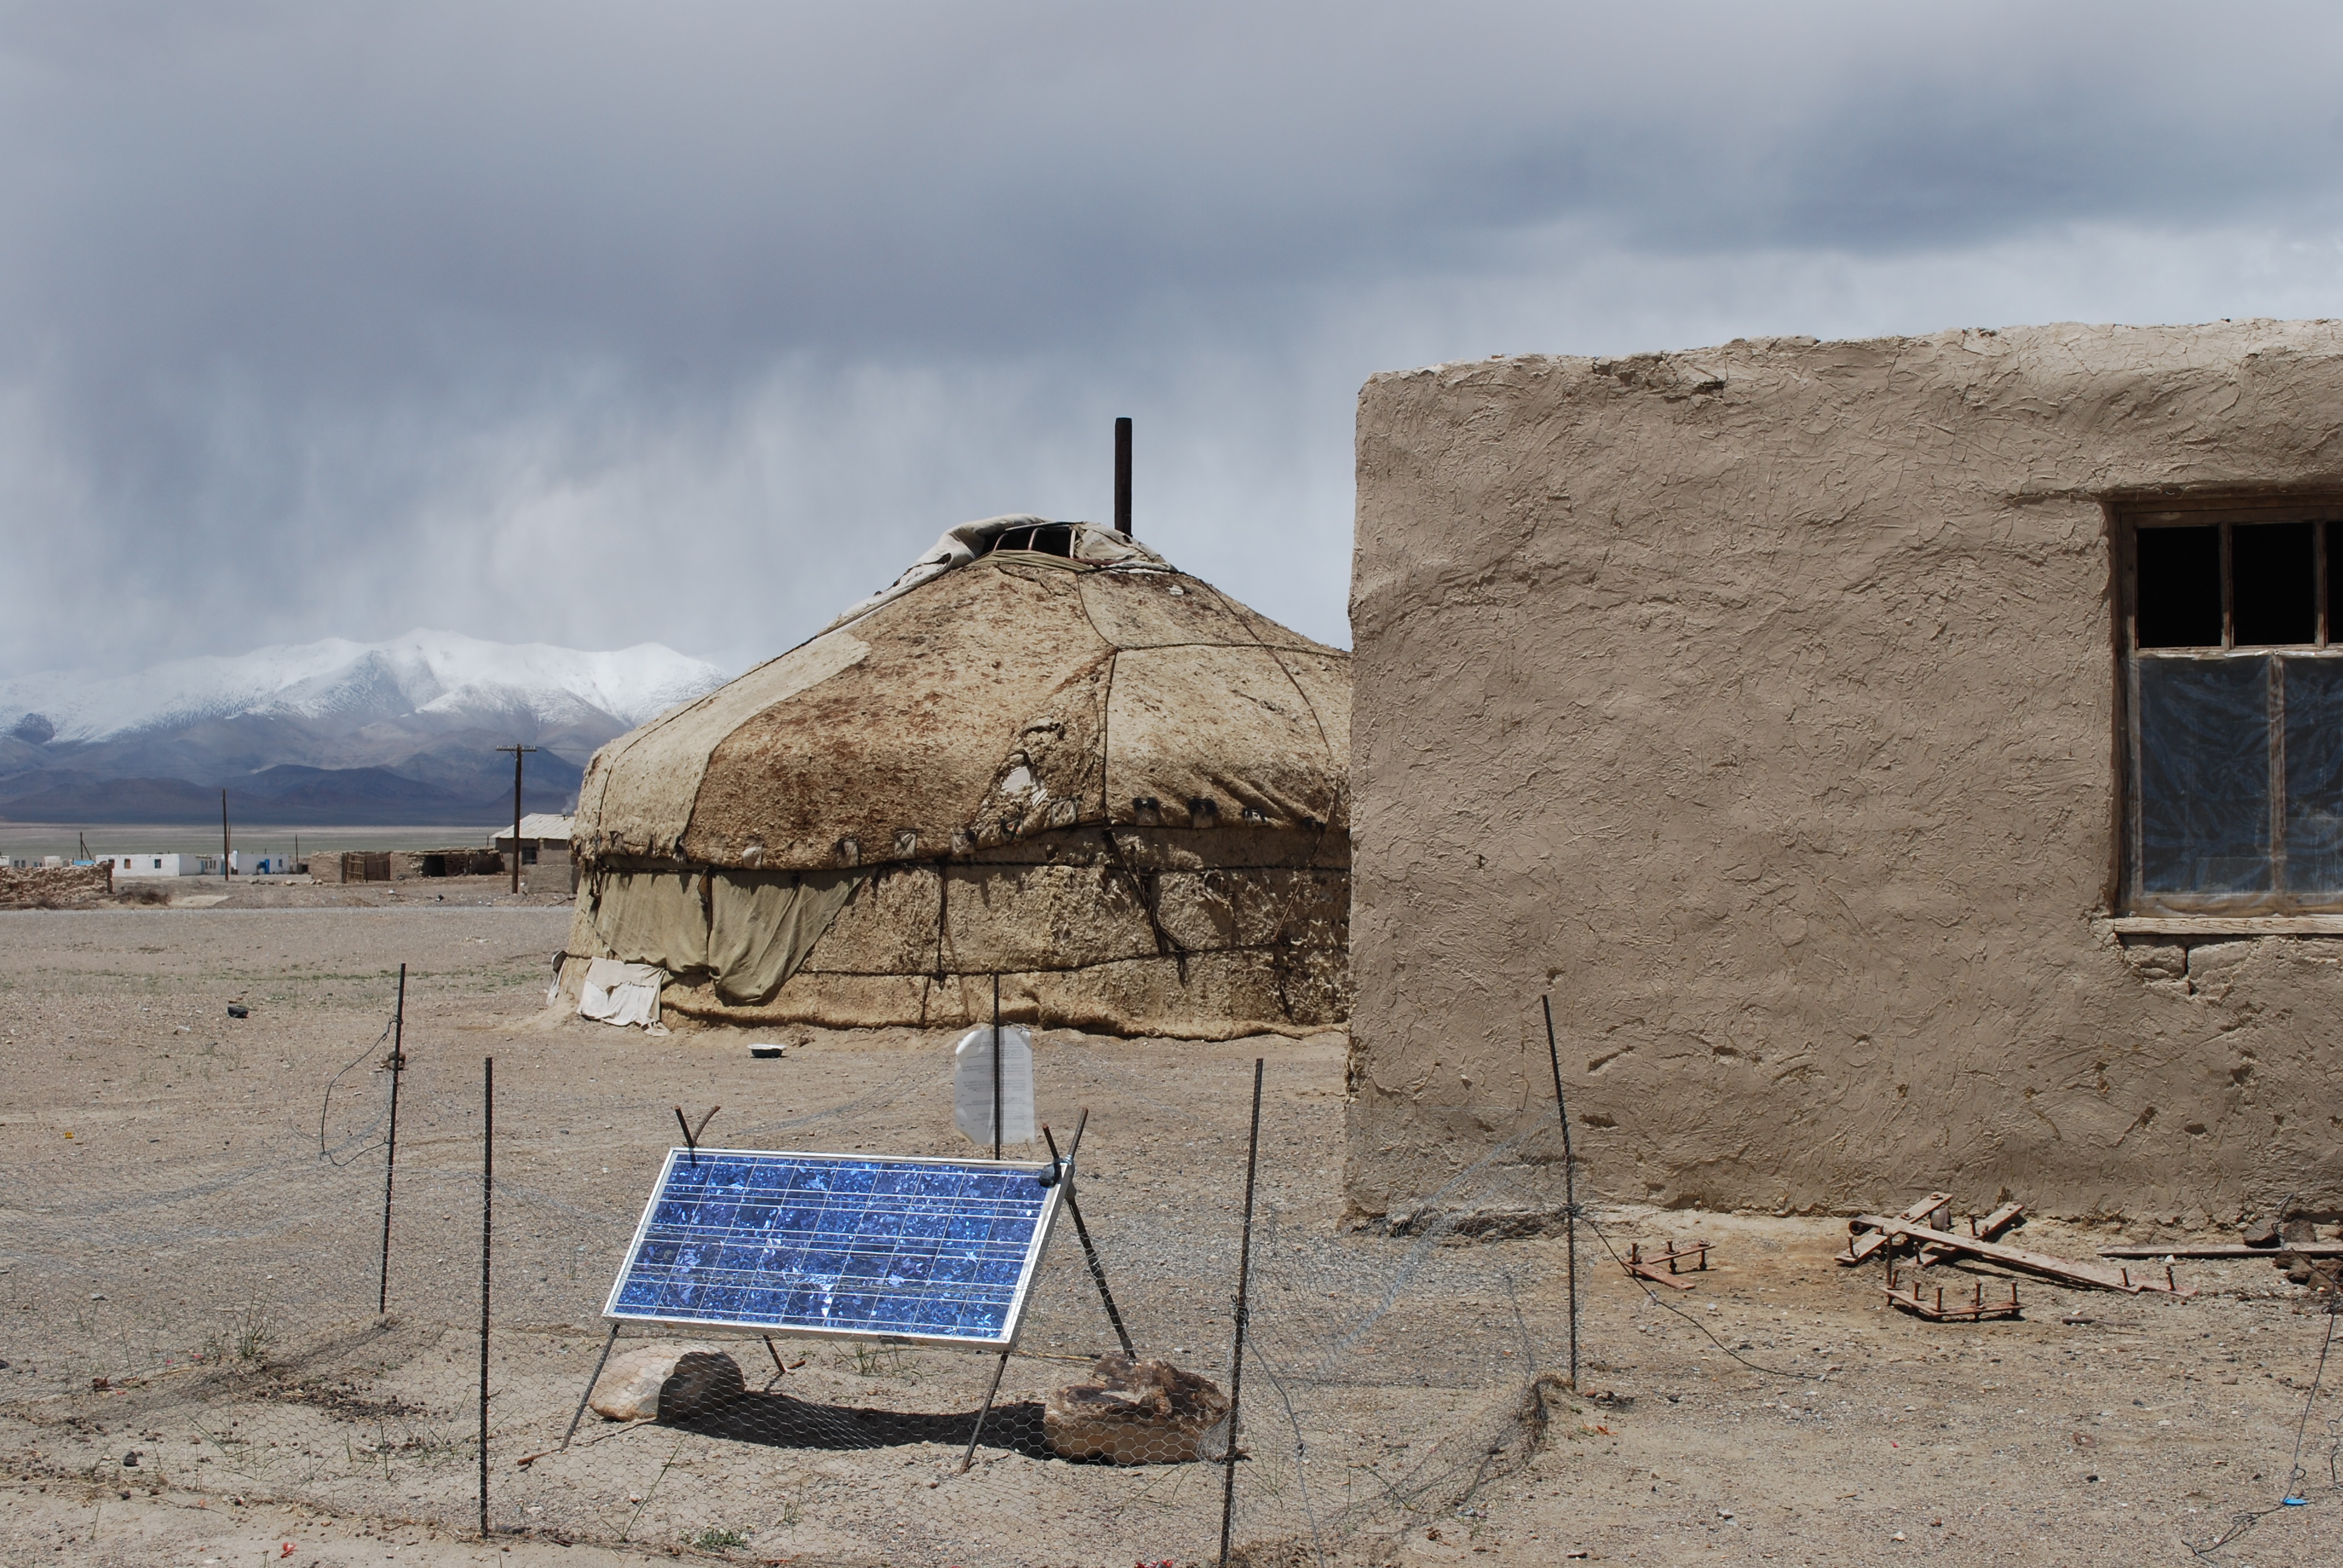 Temporary seismic station in the Pamir Mountains. © German Research Center for Geosciences, Dr. Bernd Schurr